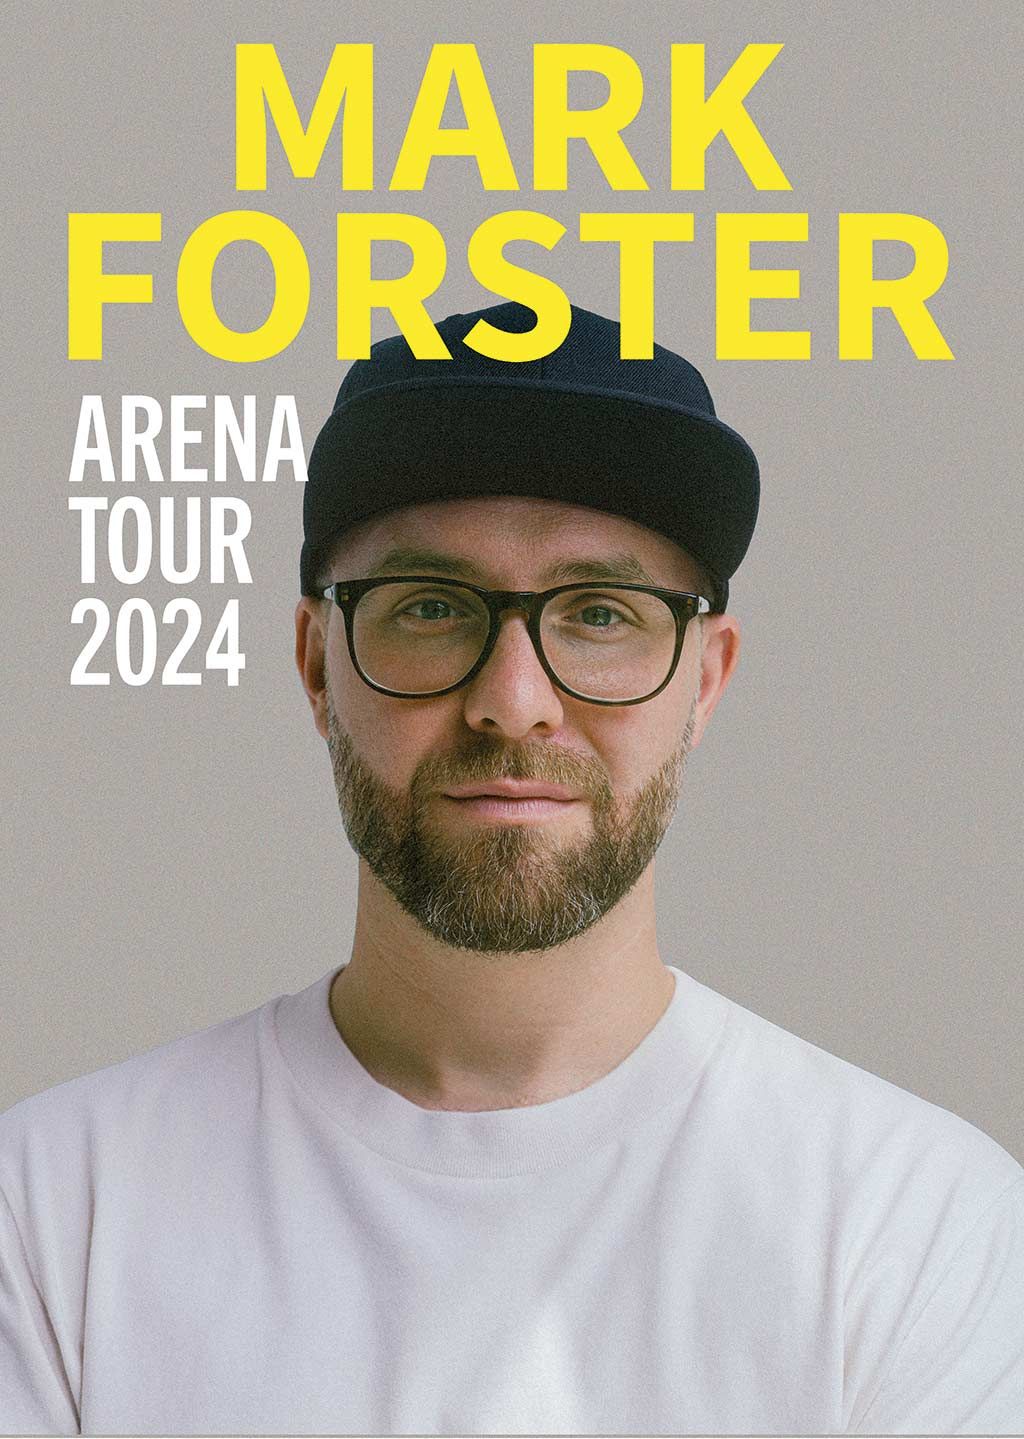 Mark Forster at Wunderino Arena Tickets